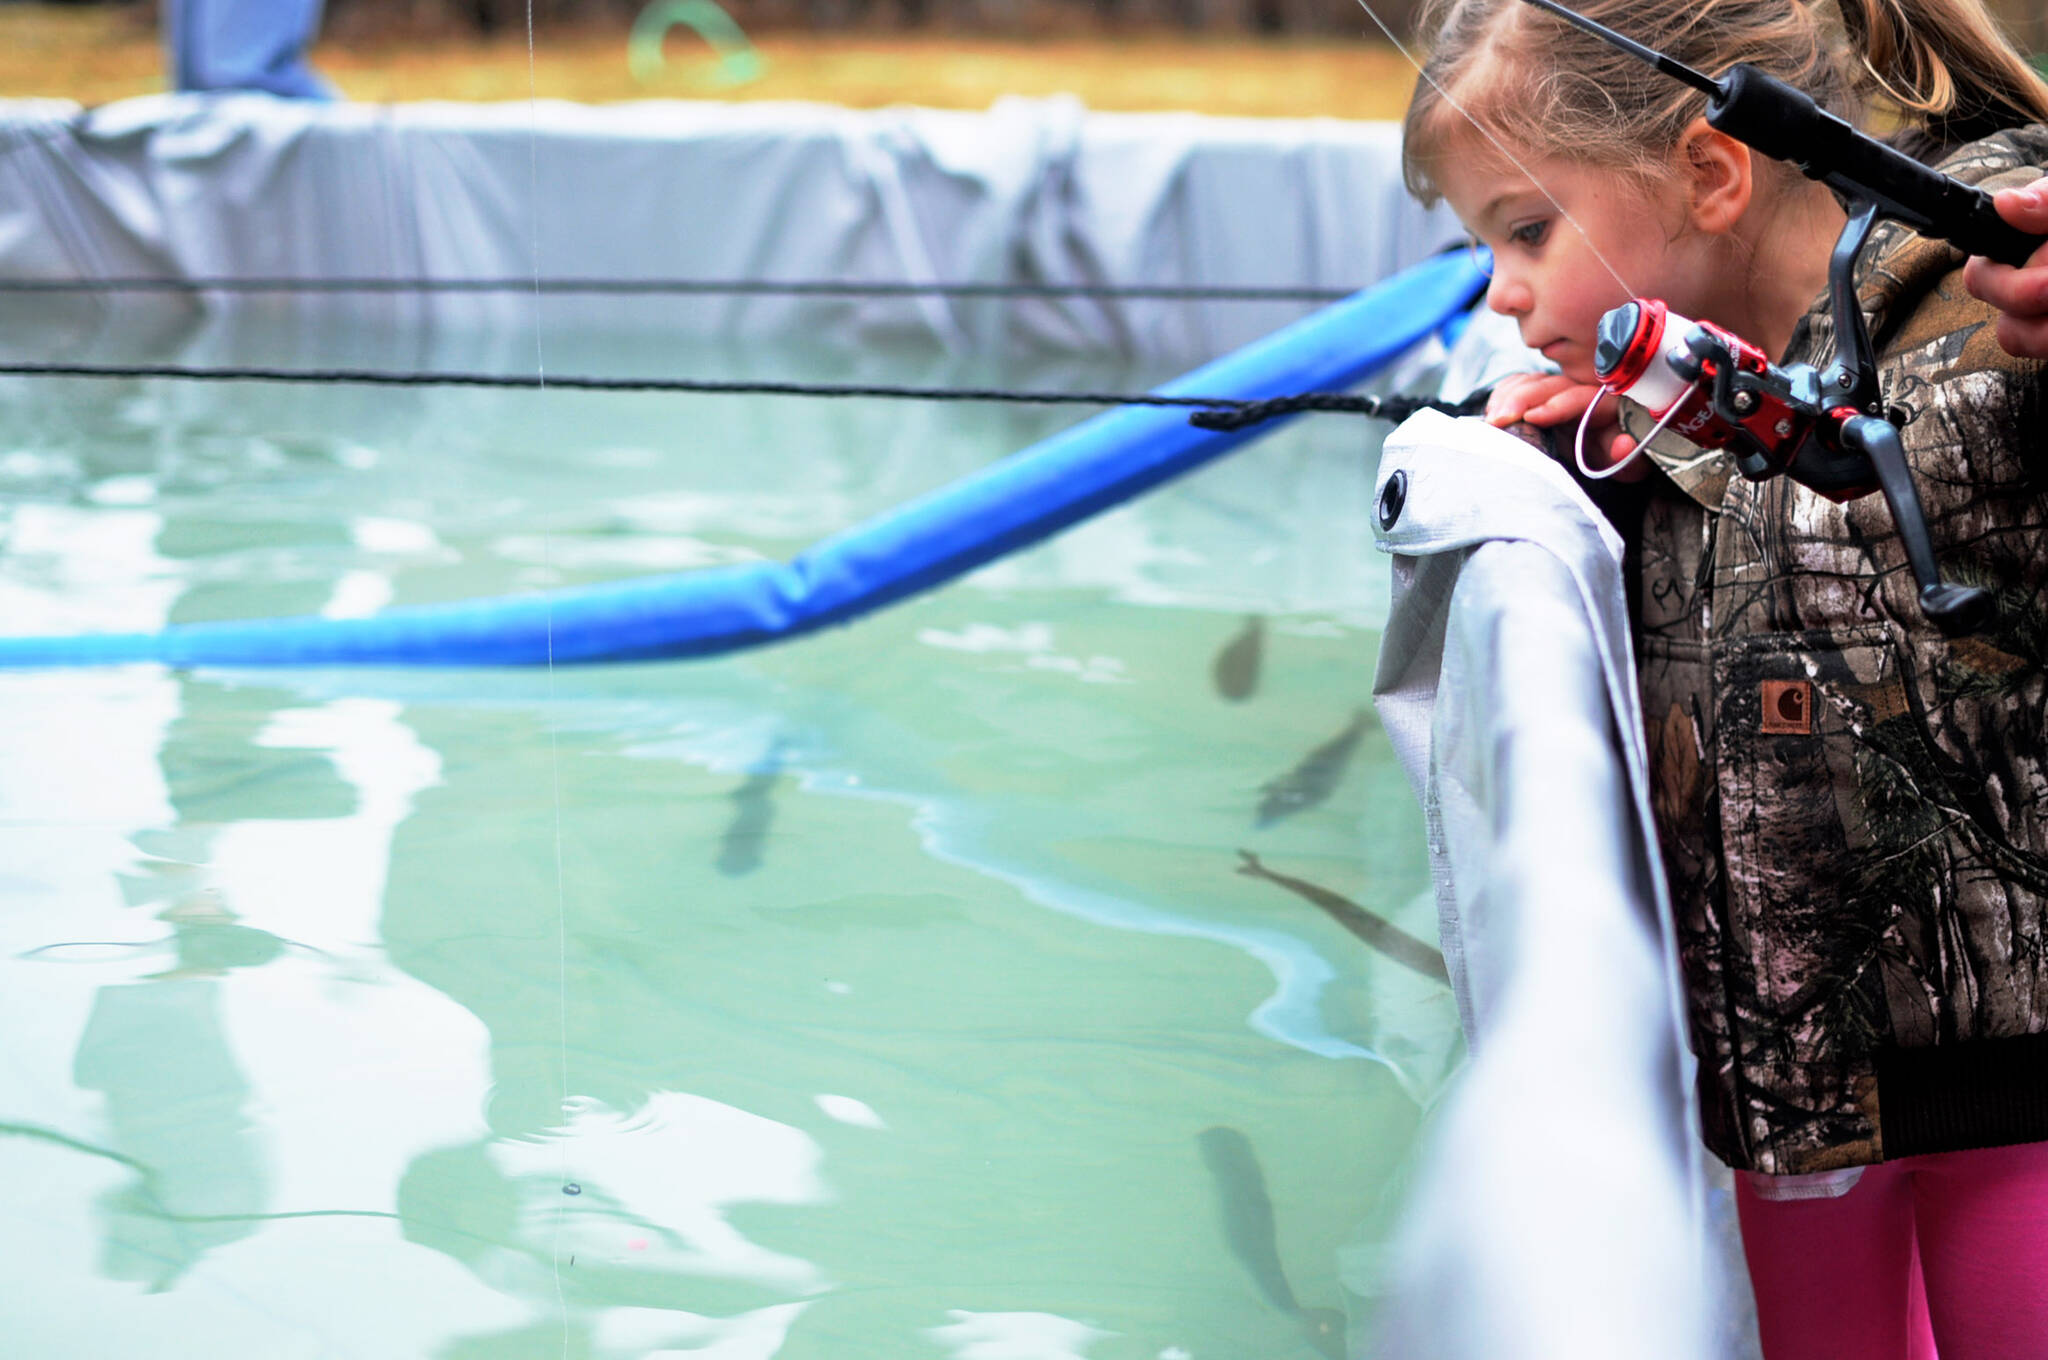 Harper Leck, 3, watches as her line and weight sink into the water at an Alaska Department of Fish and Game-stocked fish pond at the annual Sports and Rec Trade Show at the Soldotna Regional Sports Complex on Sunday, April 29, 2018, in Soldotna, Alaska. (Photo by Elizabeth Earl/Peninsula Clarion file)